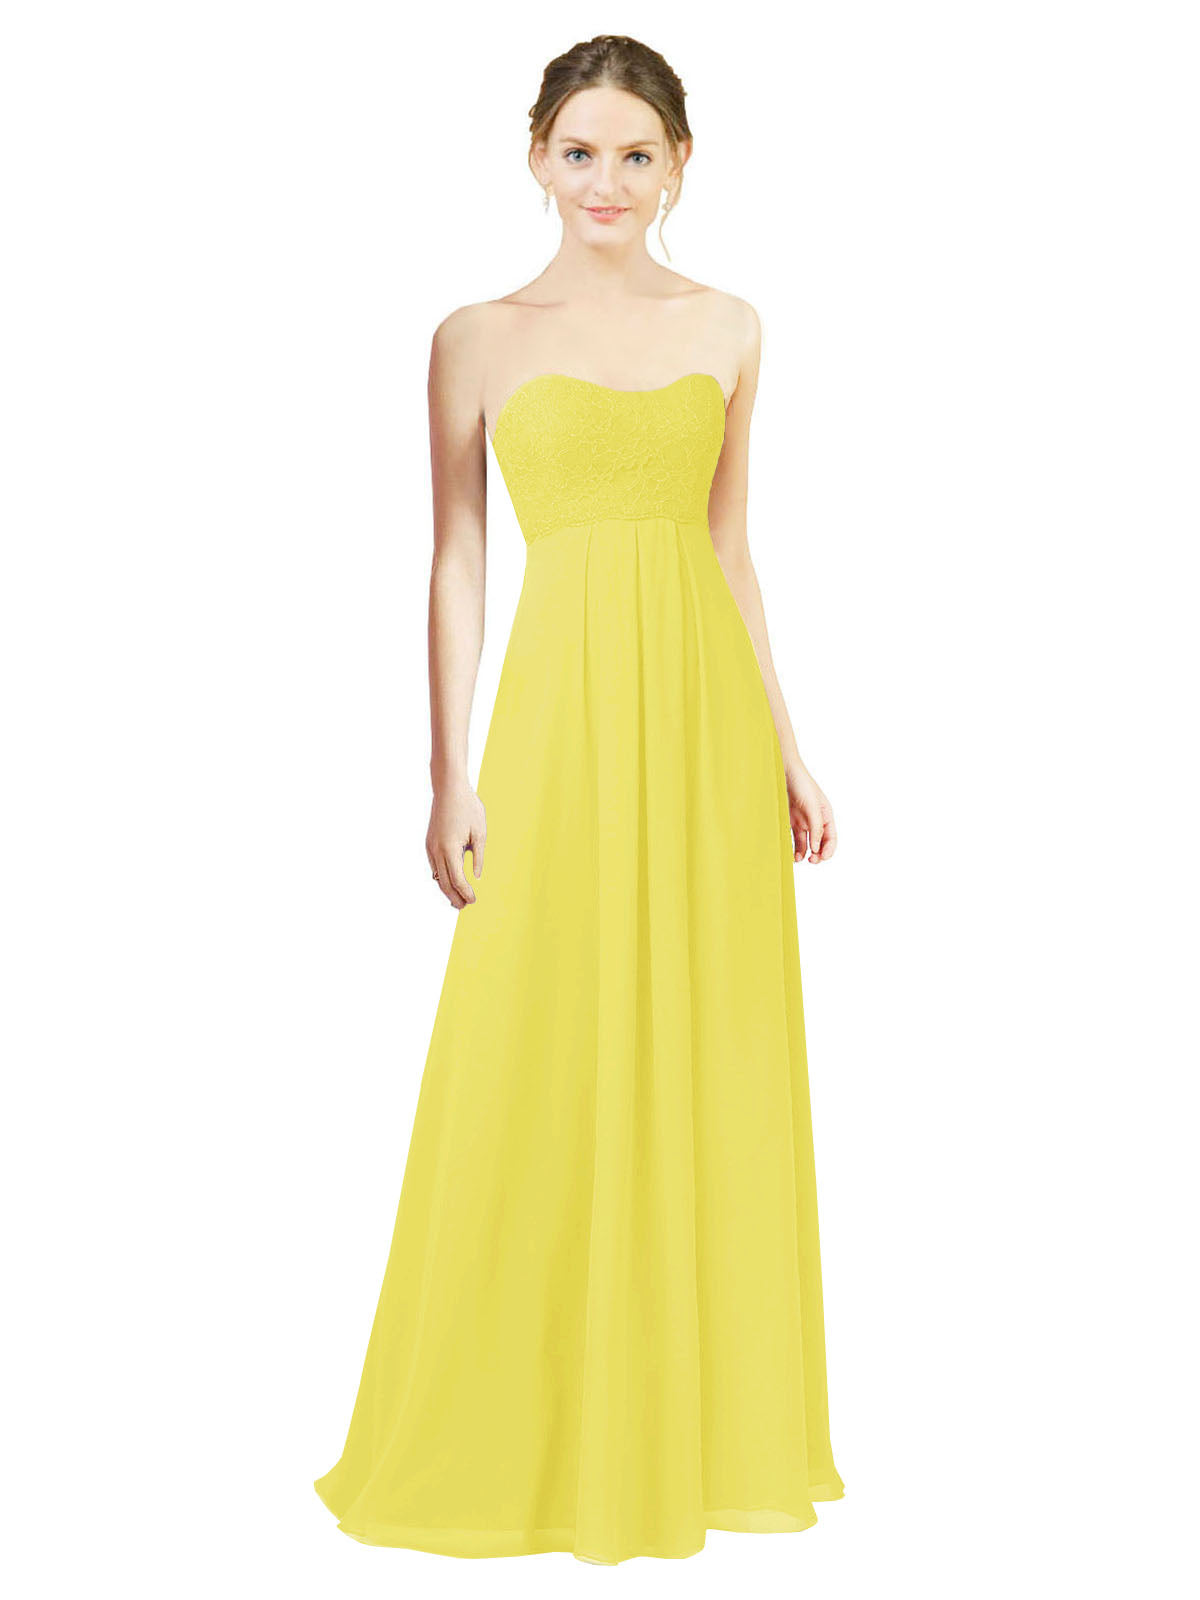 Yellow A-Line Sweetheart Strapless Long Bridesmaid Dress Melany